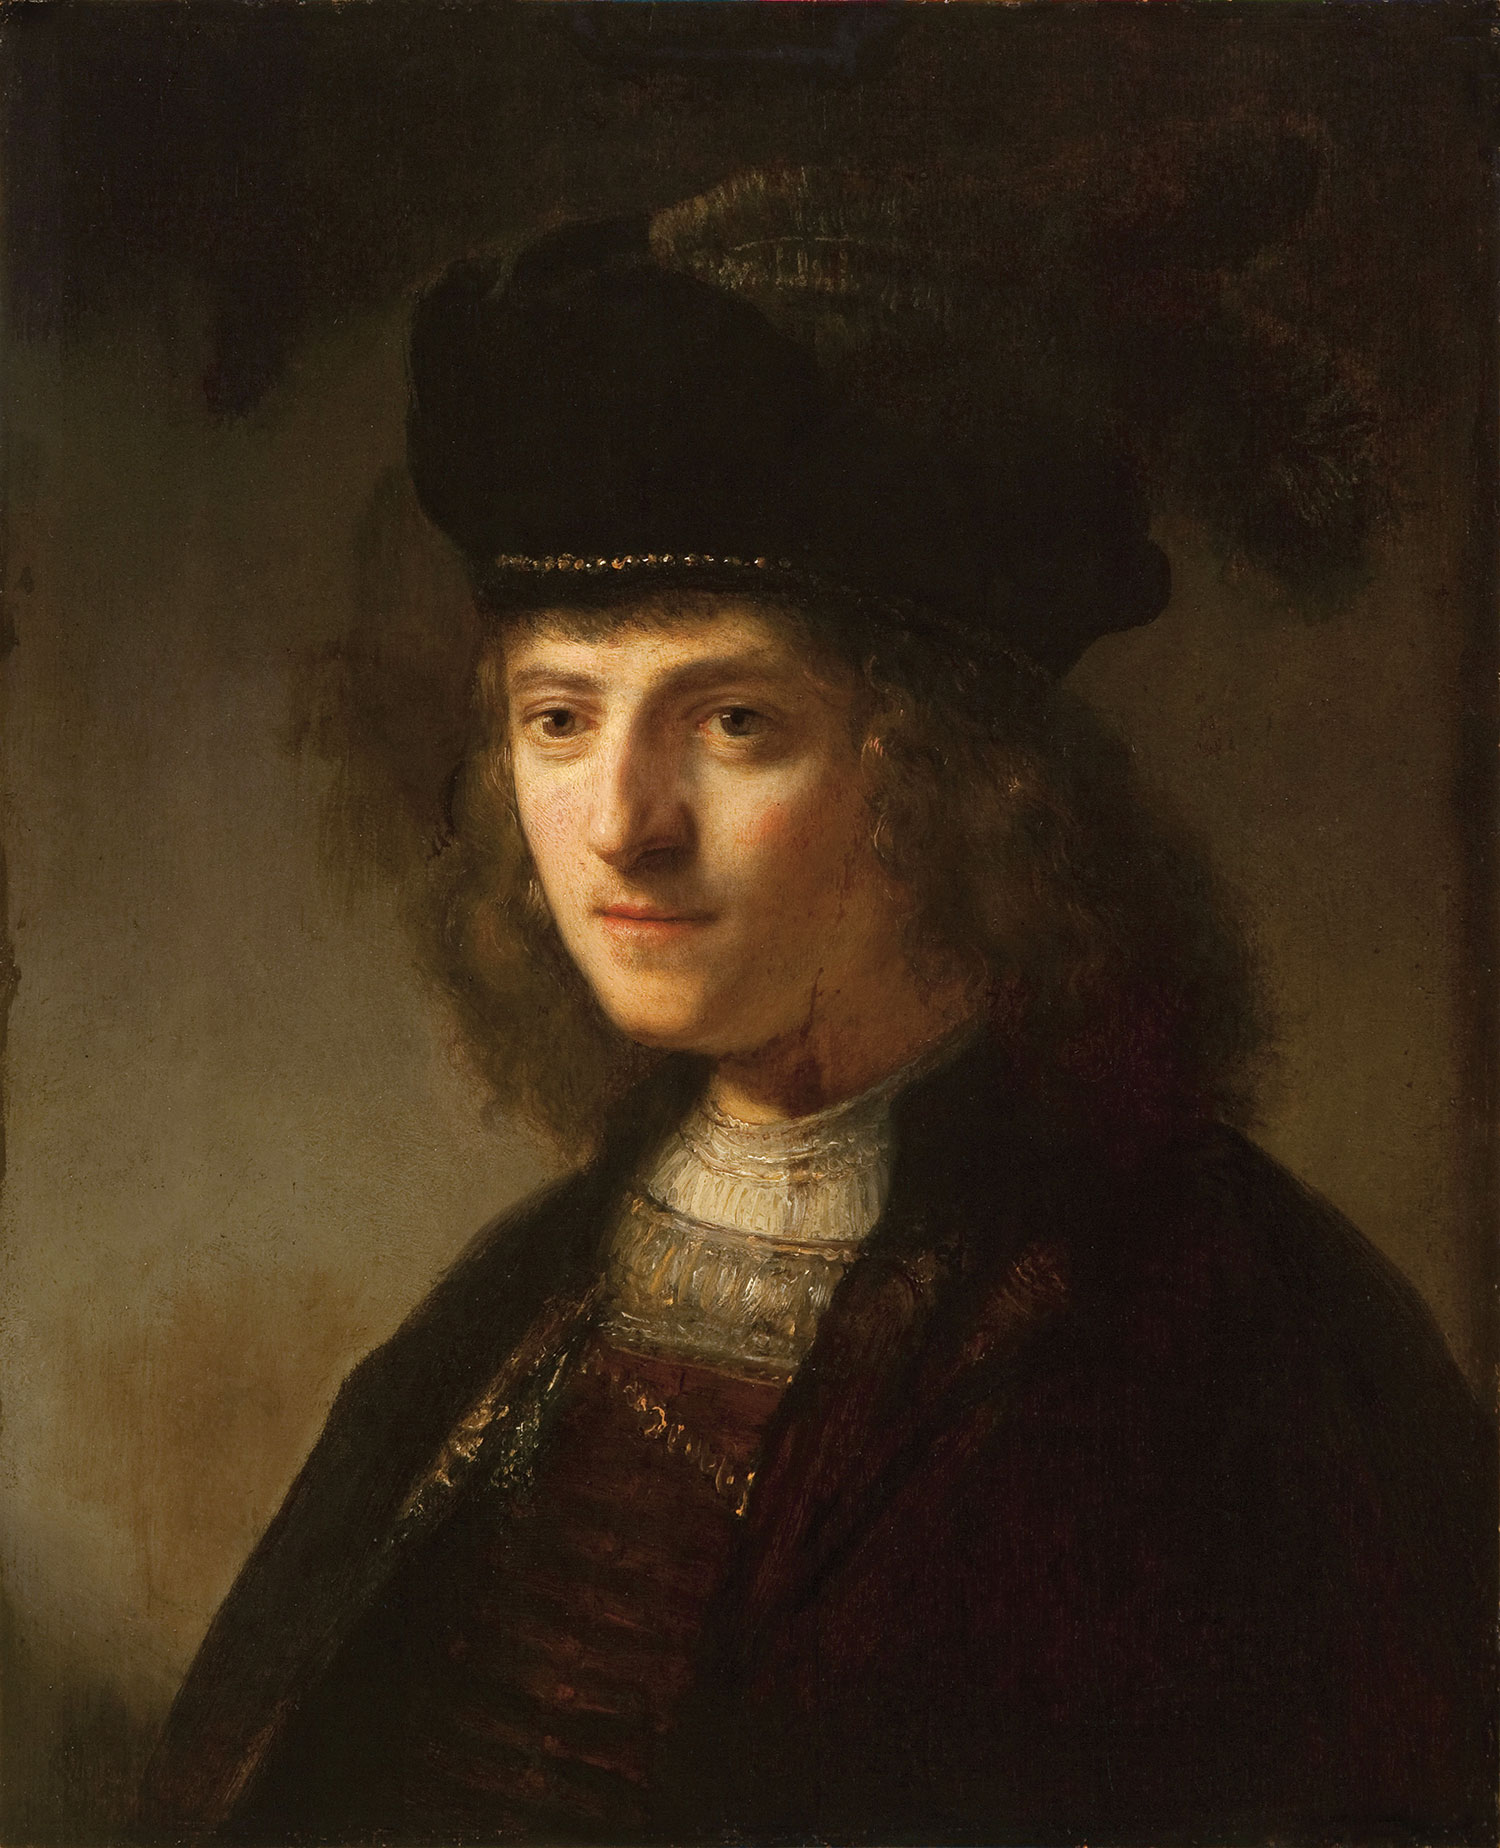 Govaert Flinck (Dutch, 1615–1660), A Young Man in a Feathered Beret, about 1636, oil on panel. Taft Museum of Art, Bequest of Charles Phelps Taft and Anna Sinton Taft, 1931.416